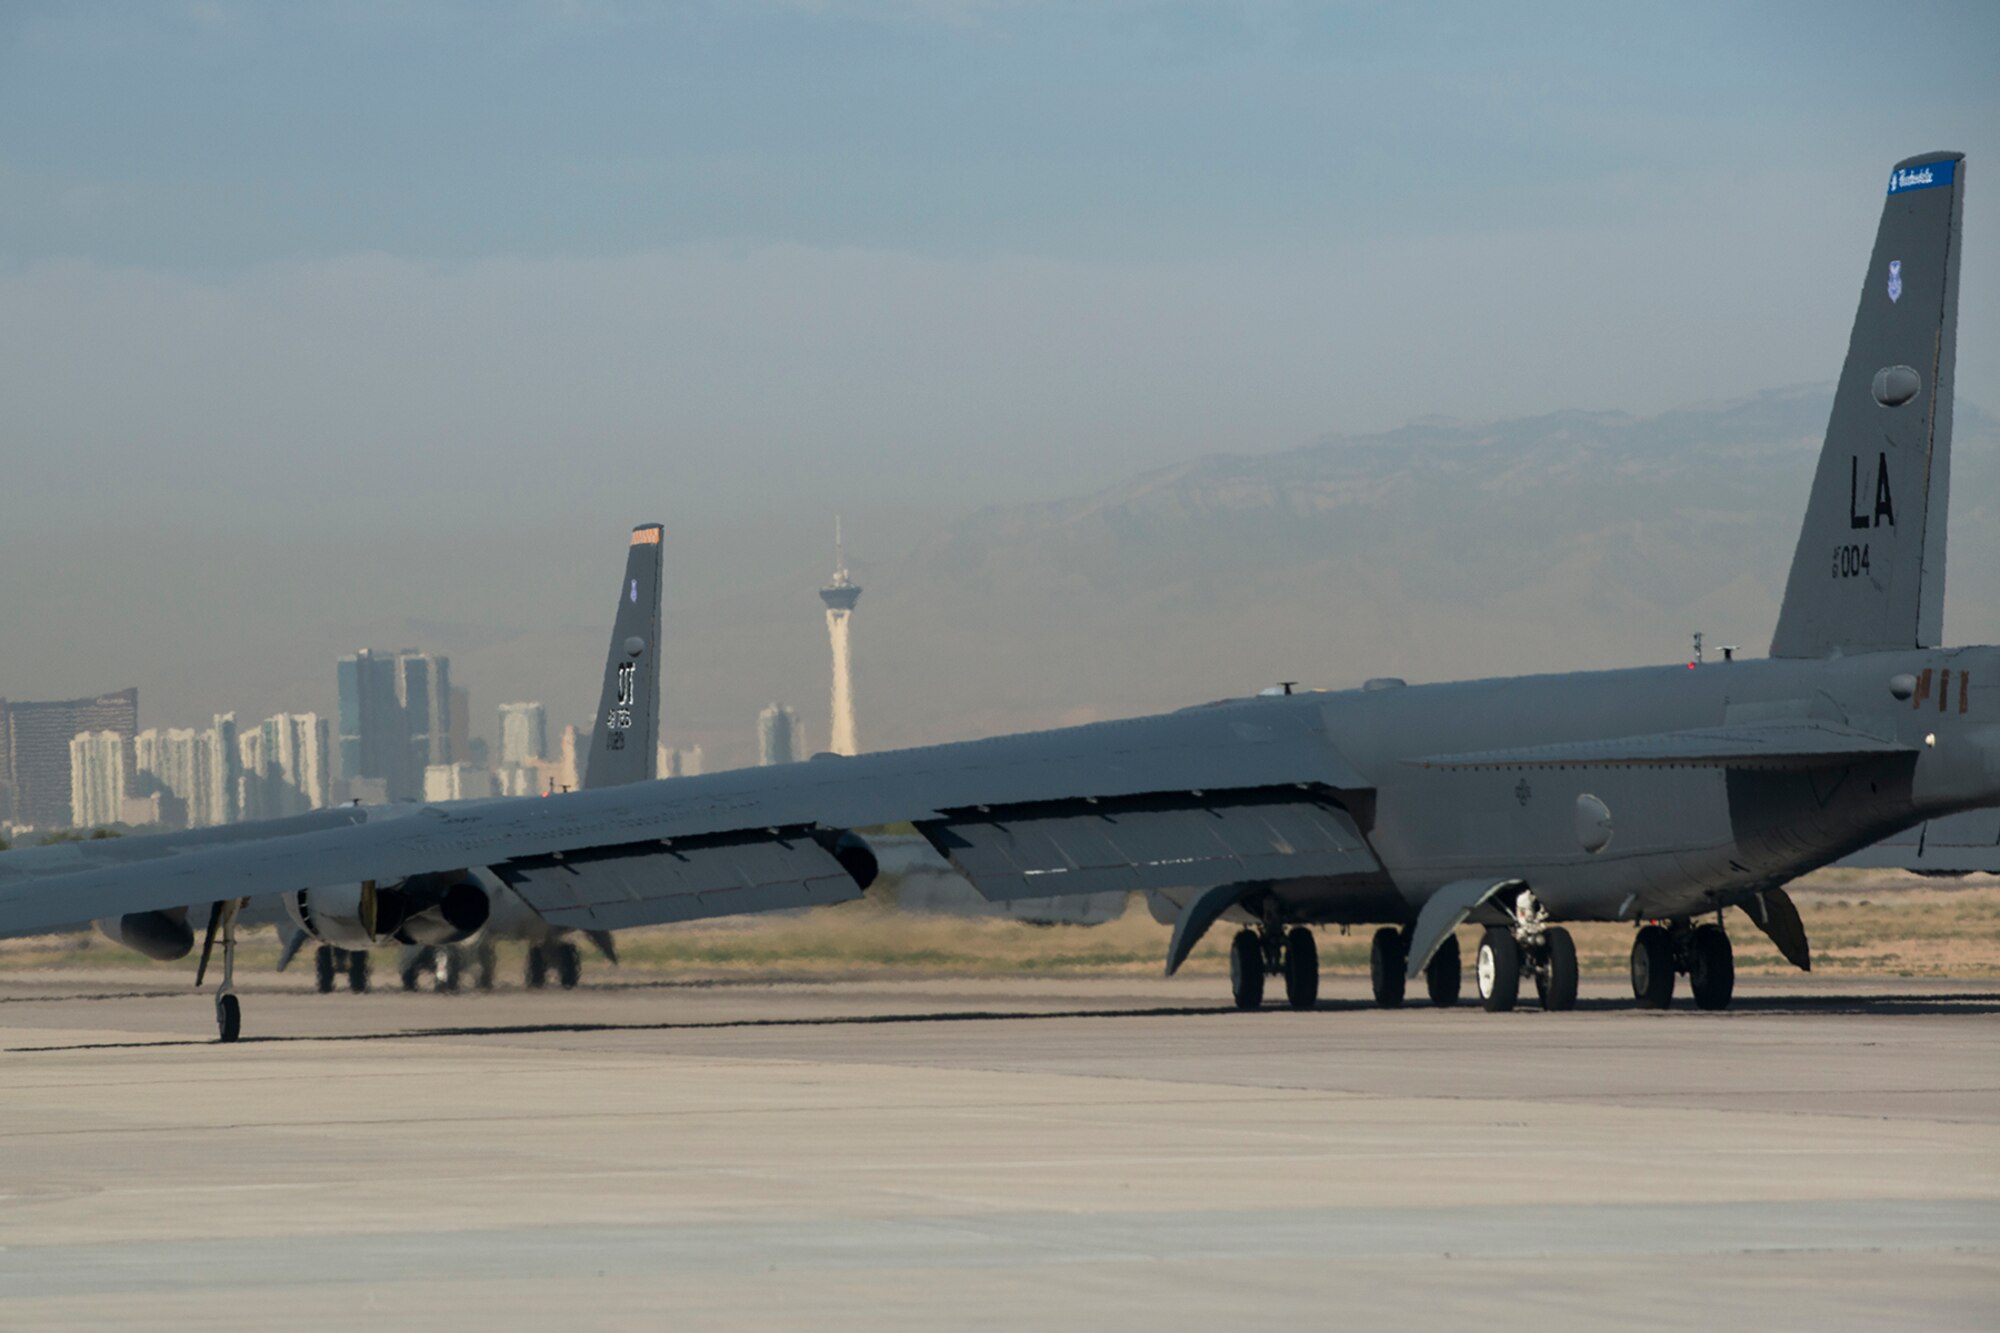 Two U.S. Air Force B-52H Stratofortress bombers taxi for a mission in support of the 340th Weapons Squadron (WPS) on June 8, 2016, Nellis Air Force Base, Nev. The lead B-52 is assigned to the Air Force Reserve Command’s 307th Bomb Wing and the other is assigned to the 2nd Bomb Wing, both from Barksdale Air Force Base, La. (U.S. Air Force photo by Master Sgt. Greg Steele/Released)